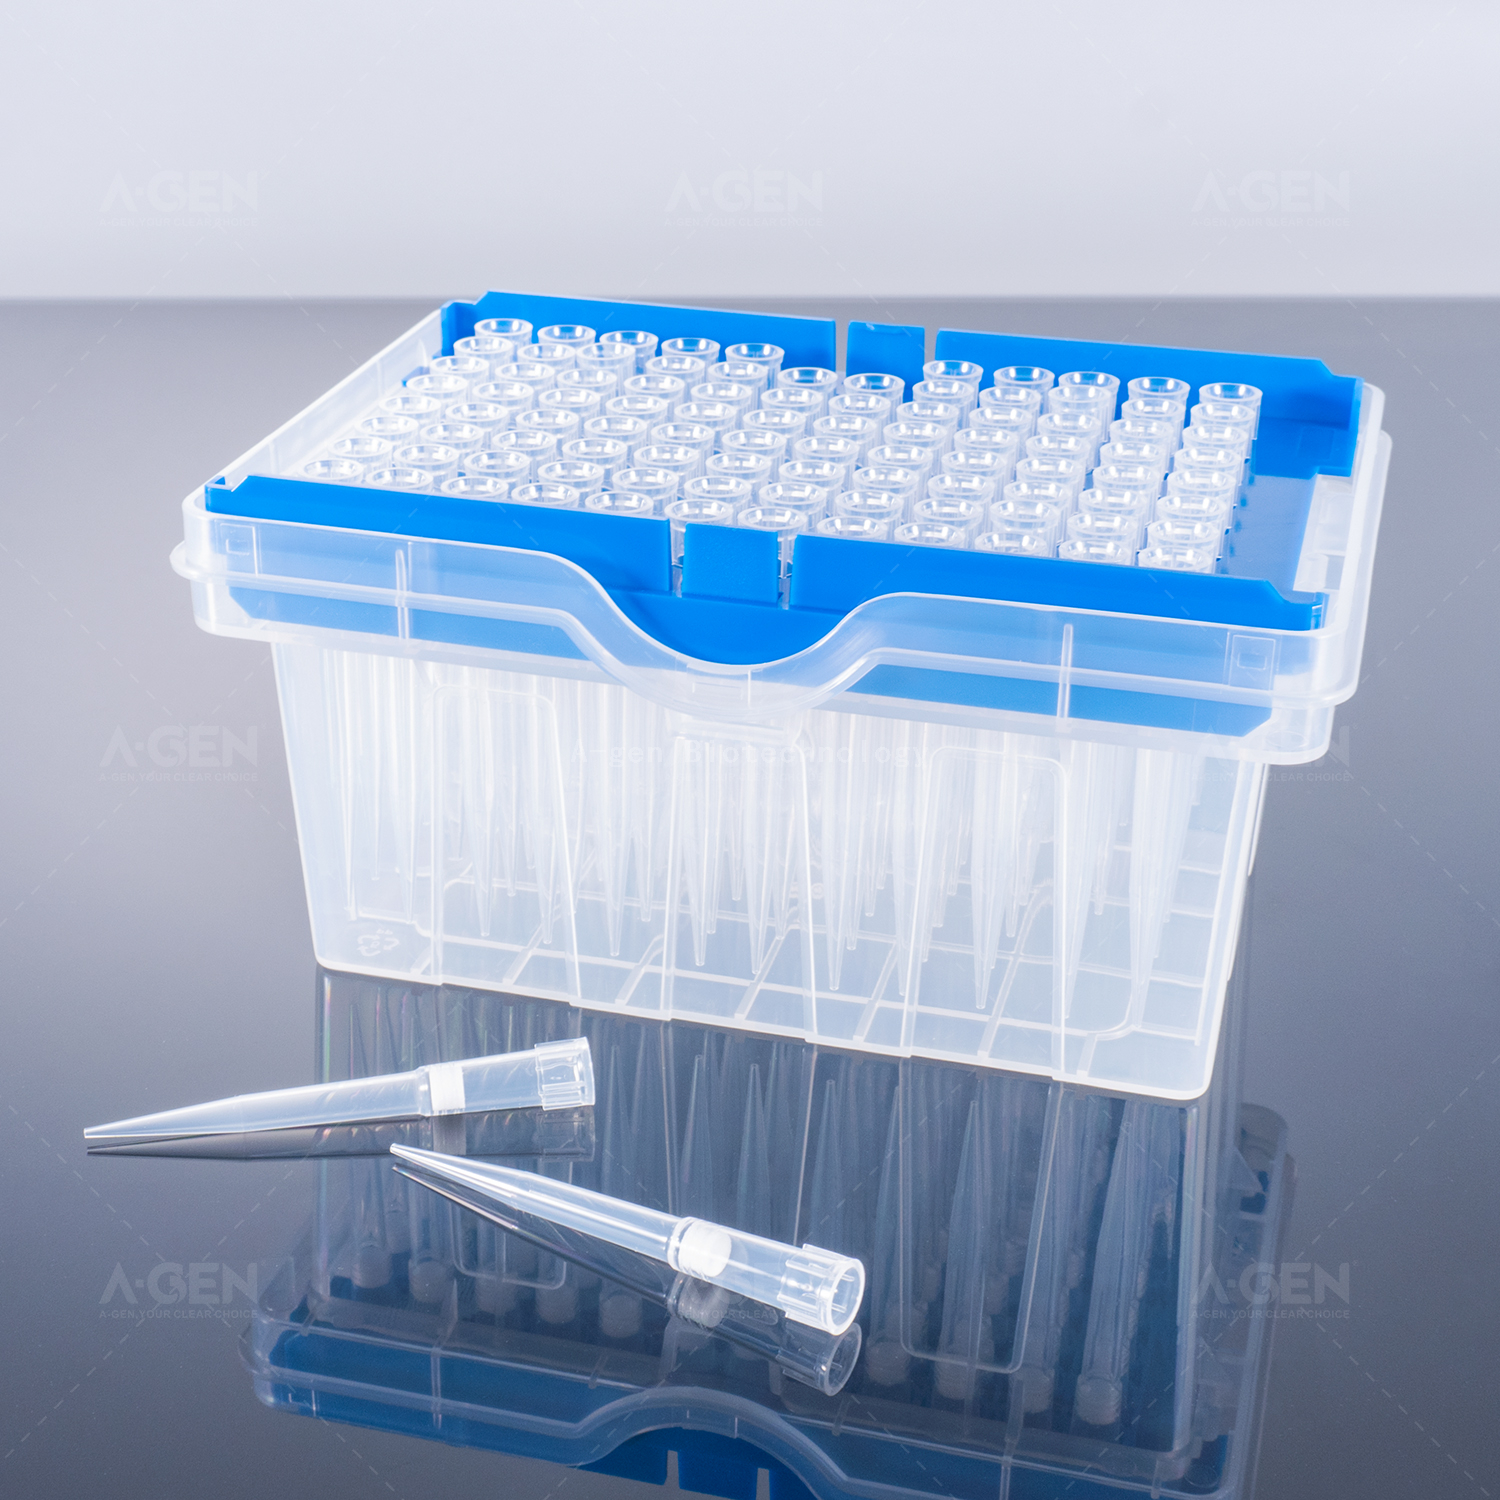 Tecan LiHa 200μL Transparent PP Pipette Tip (Racked,sterilized) for Liquid Transfer with Filter TTF-200-RSL Low Retention